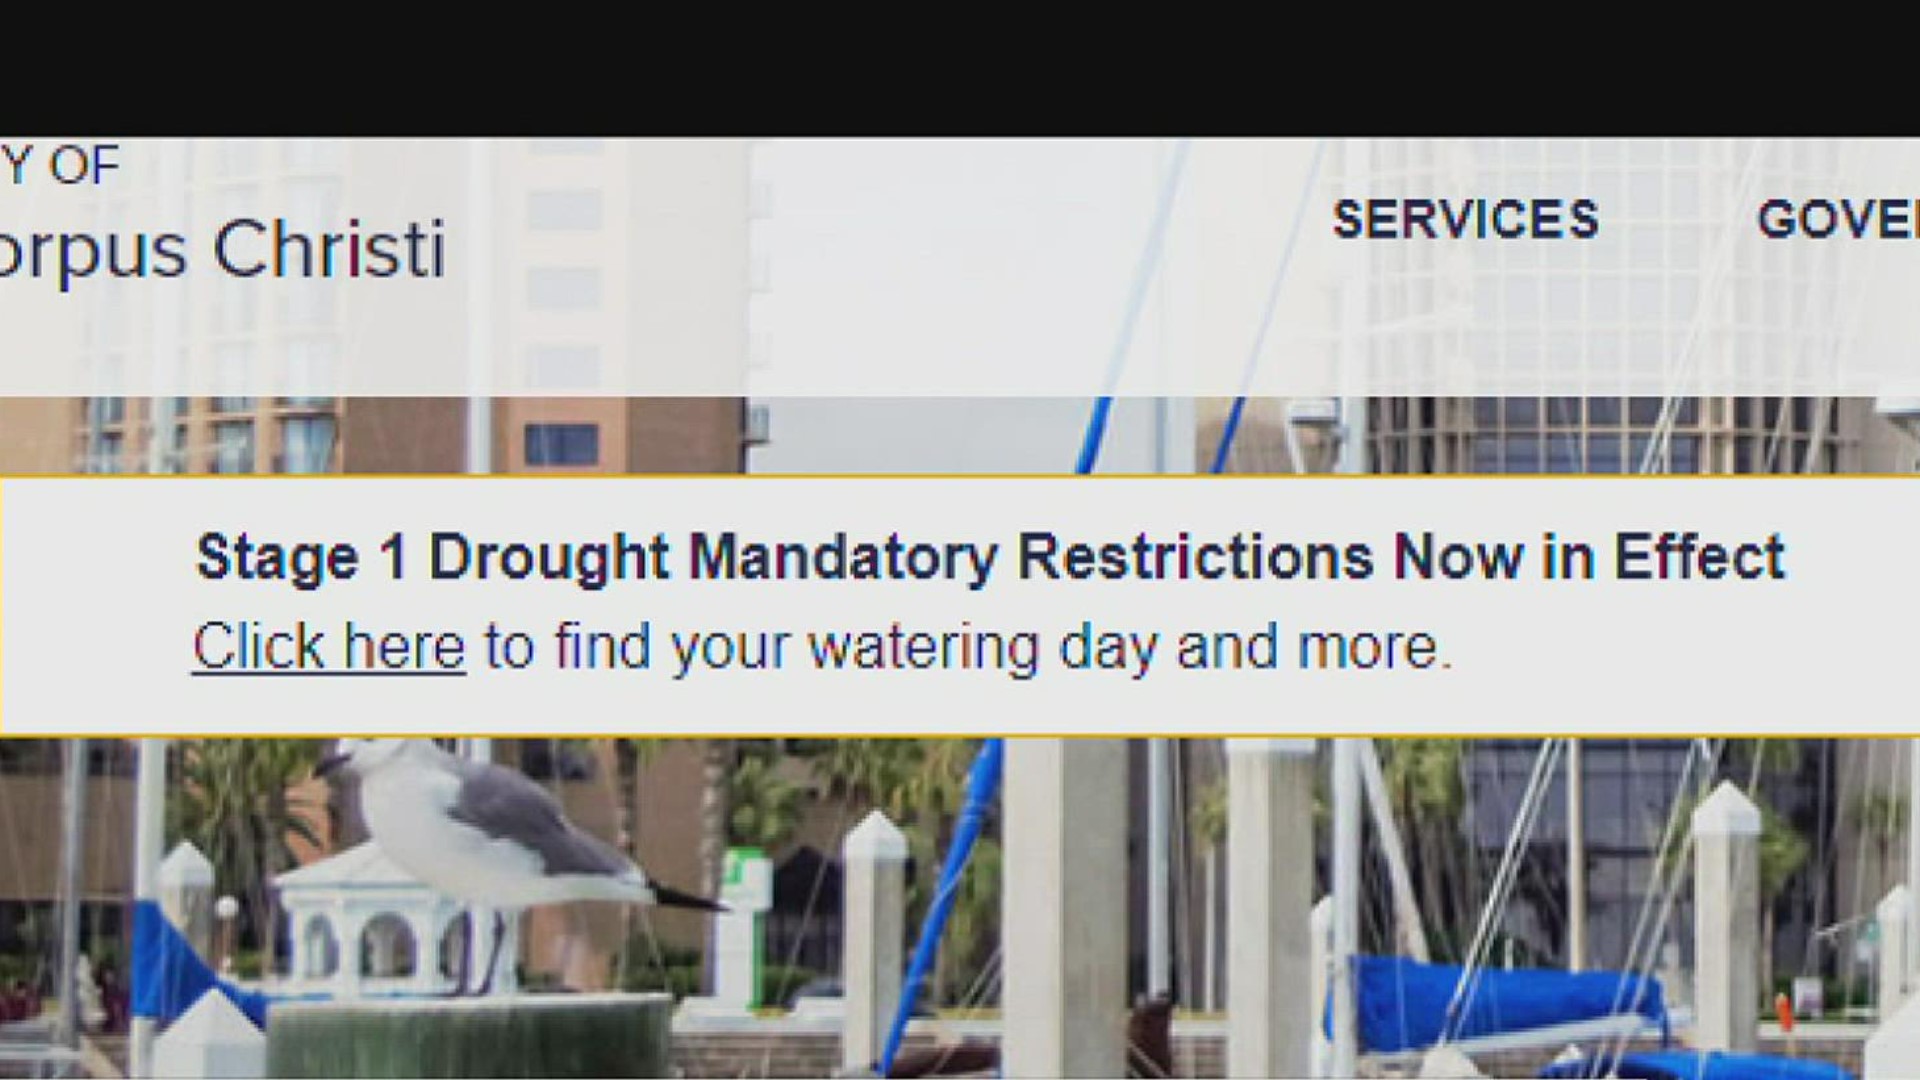 There have been 135 calls to the City call center about water restrictions -- 88 asking for details, and 47 reporting watering violations.